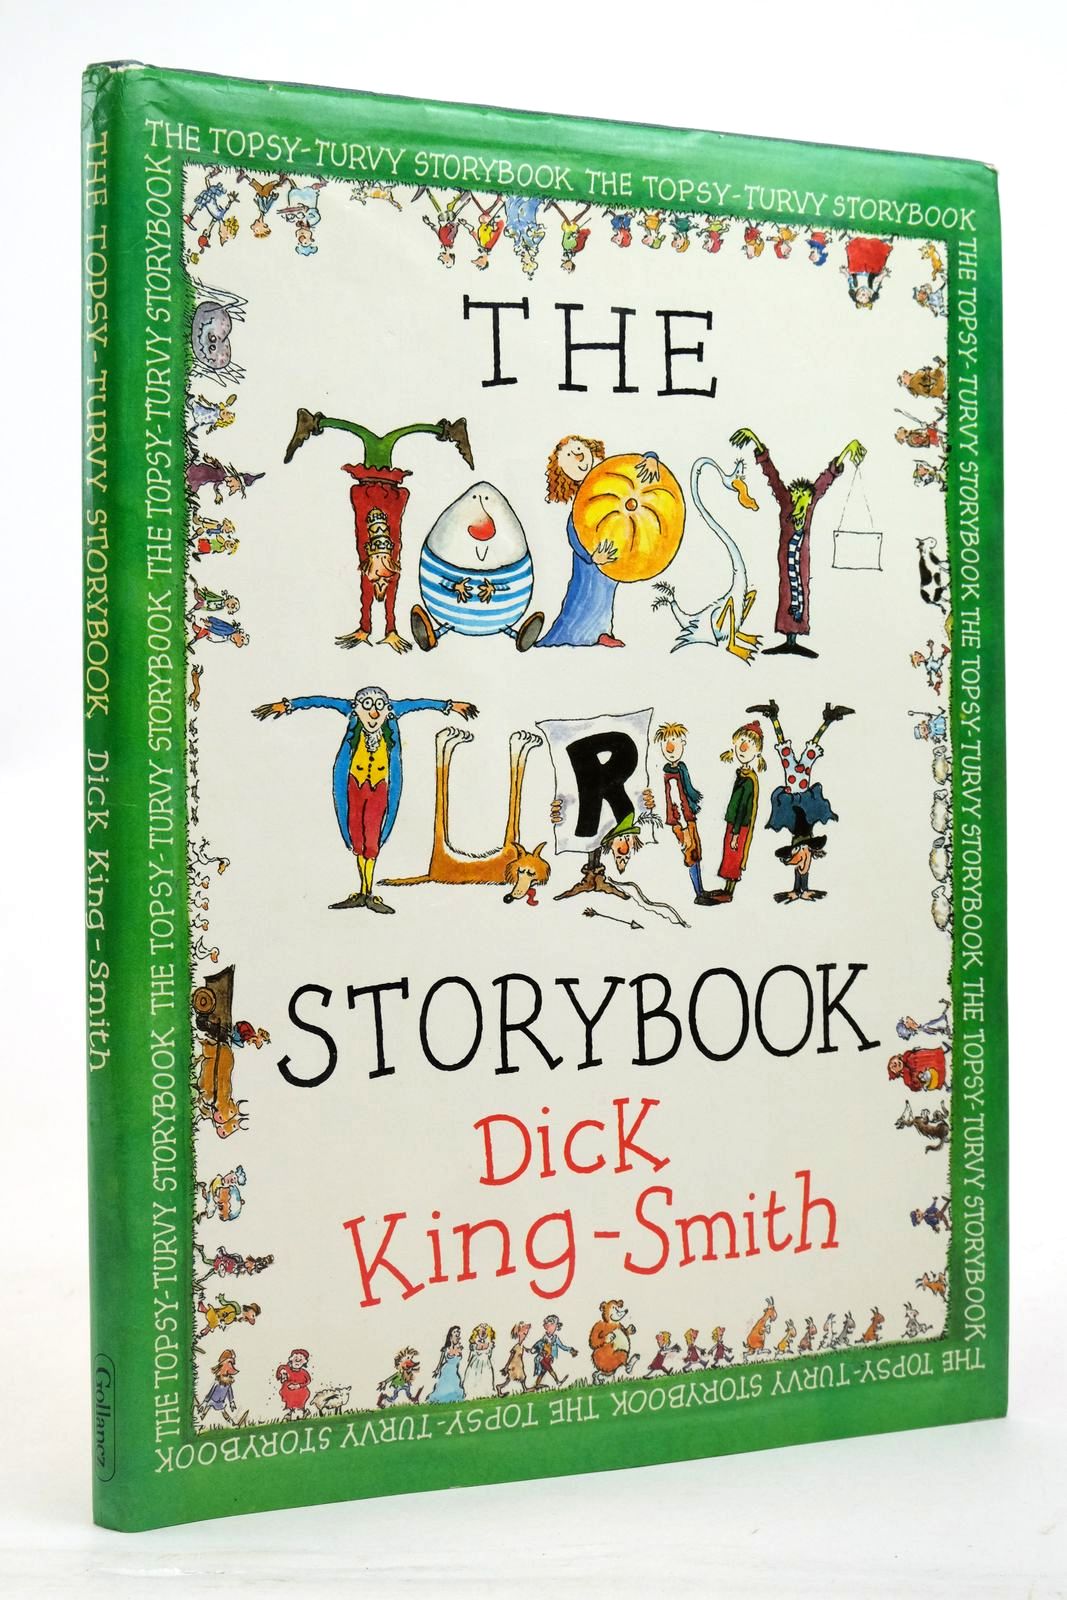 Photo of THE TOPSY-TURVY STORYBOOK written by King-Smith, Dick illustrated by Eastwood, John published by Victor Gollancz Ltd. (STOCK CODE: 2137796)  for sale by Stella & Rose's Books